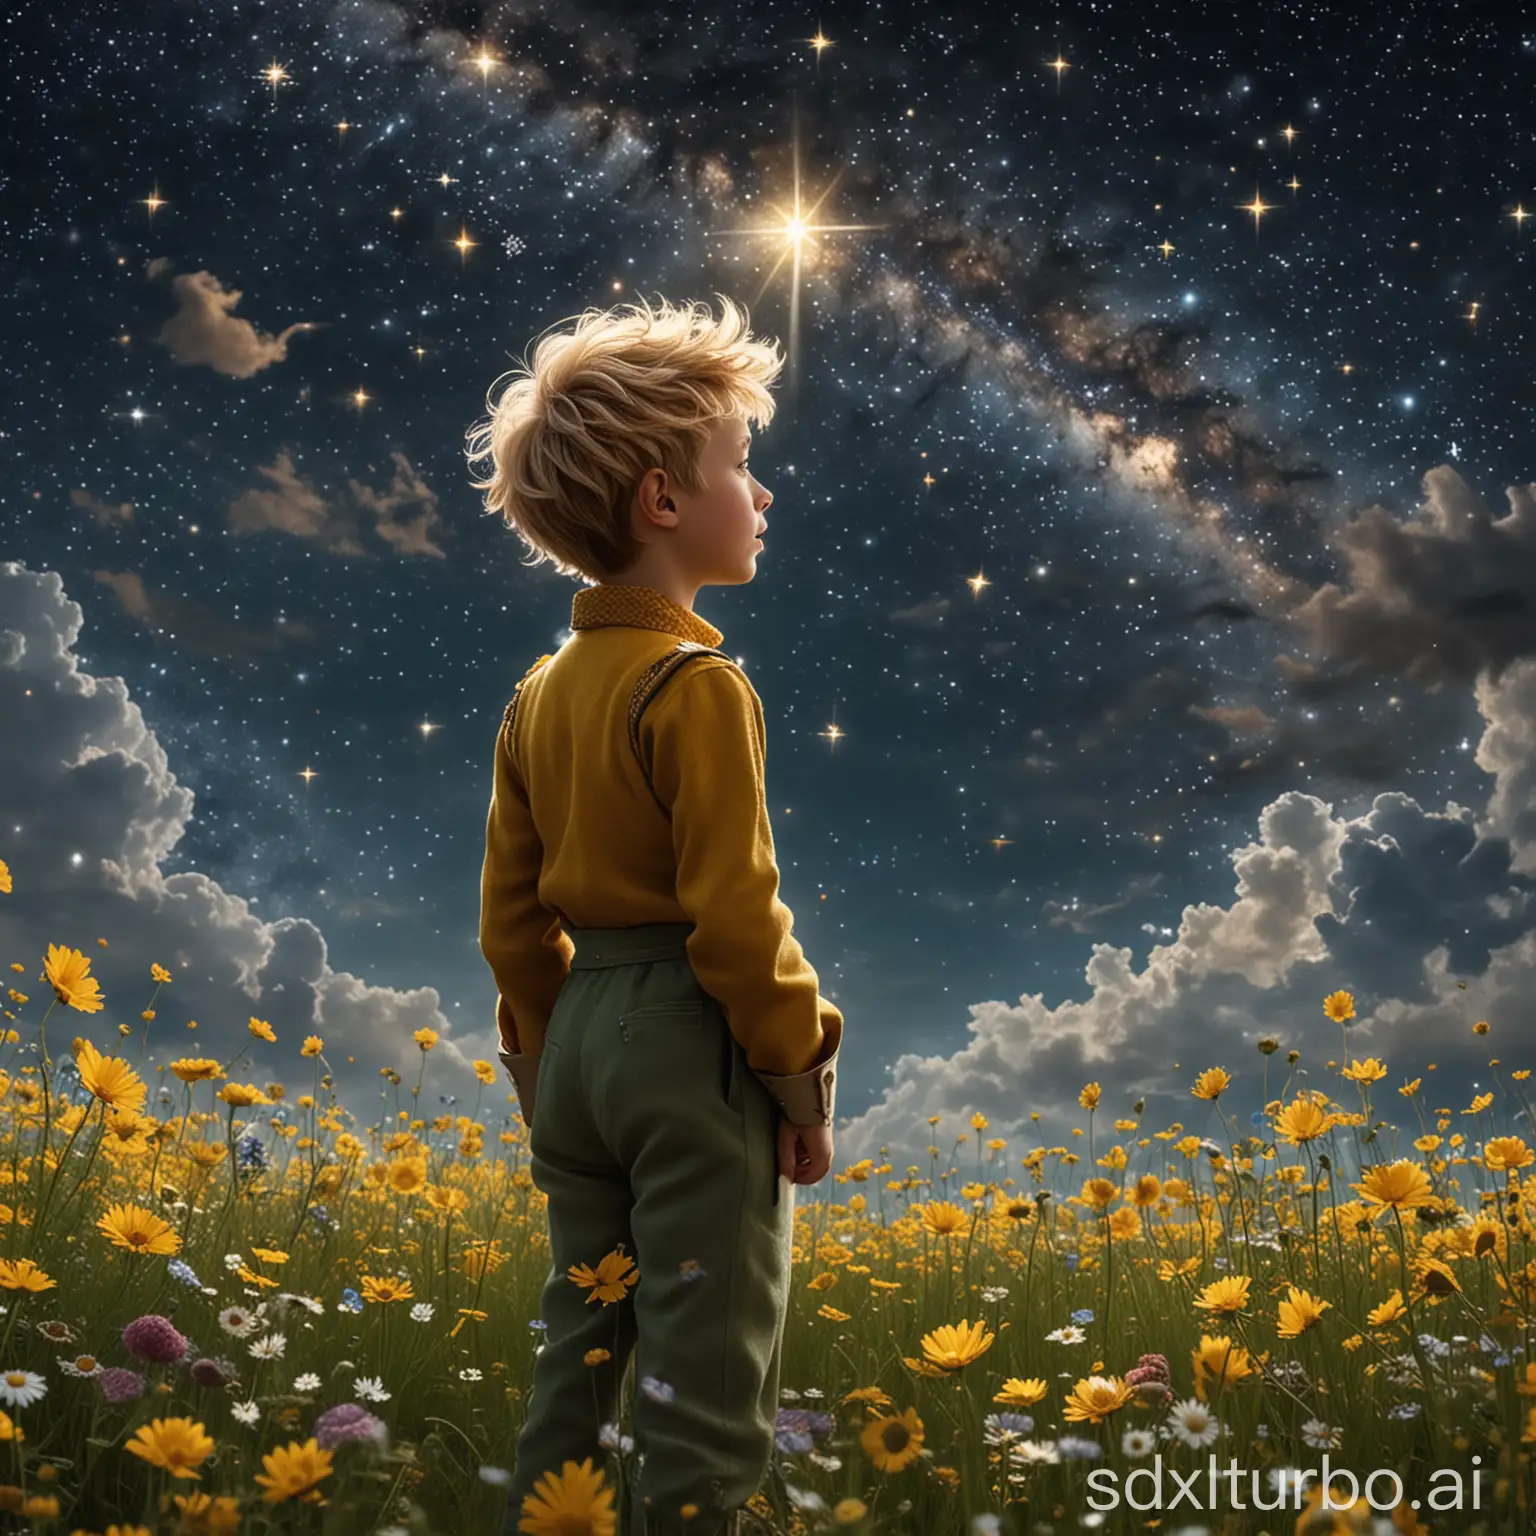 In the sky, there is a very bright star, and the little prince guards that flower every day.